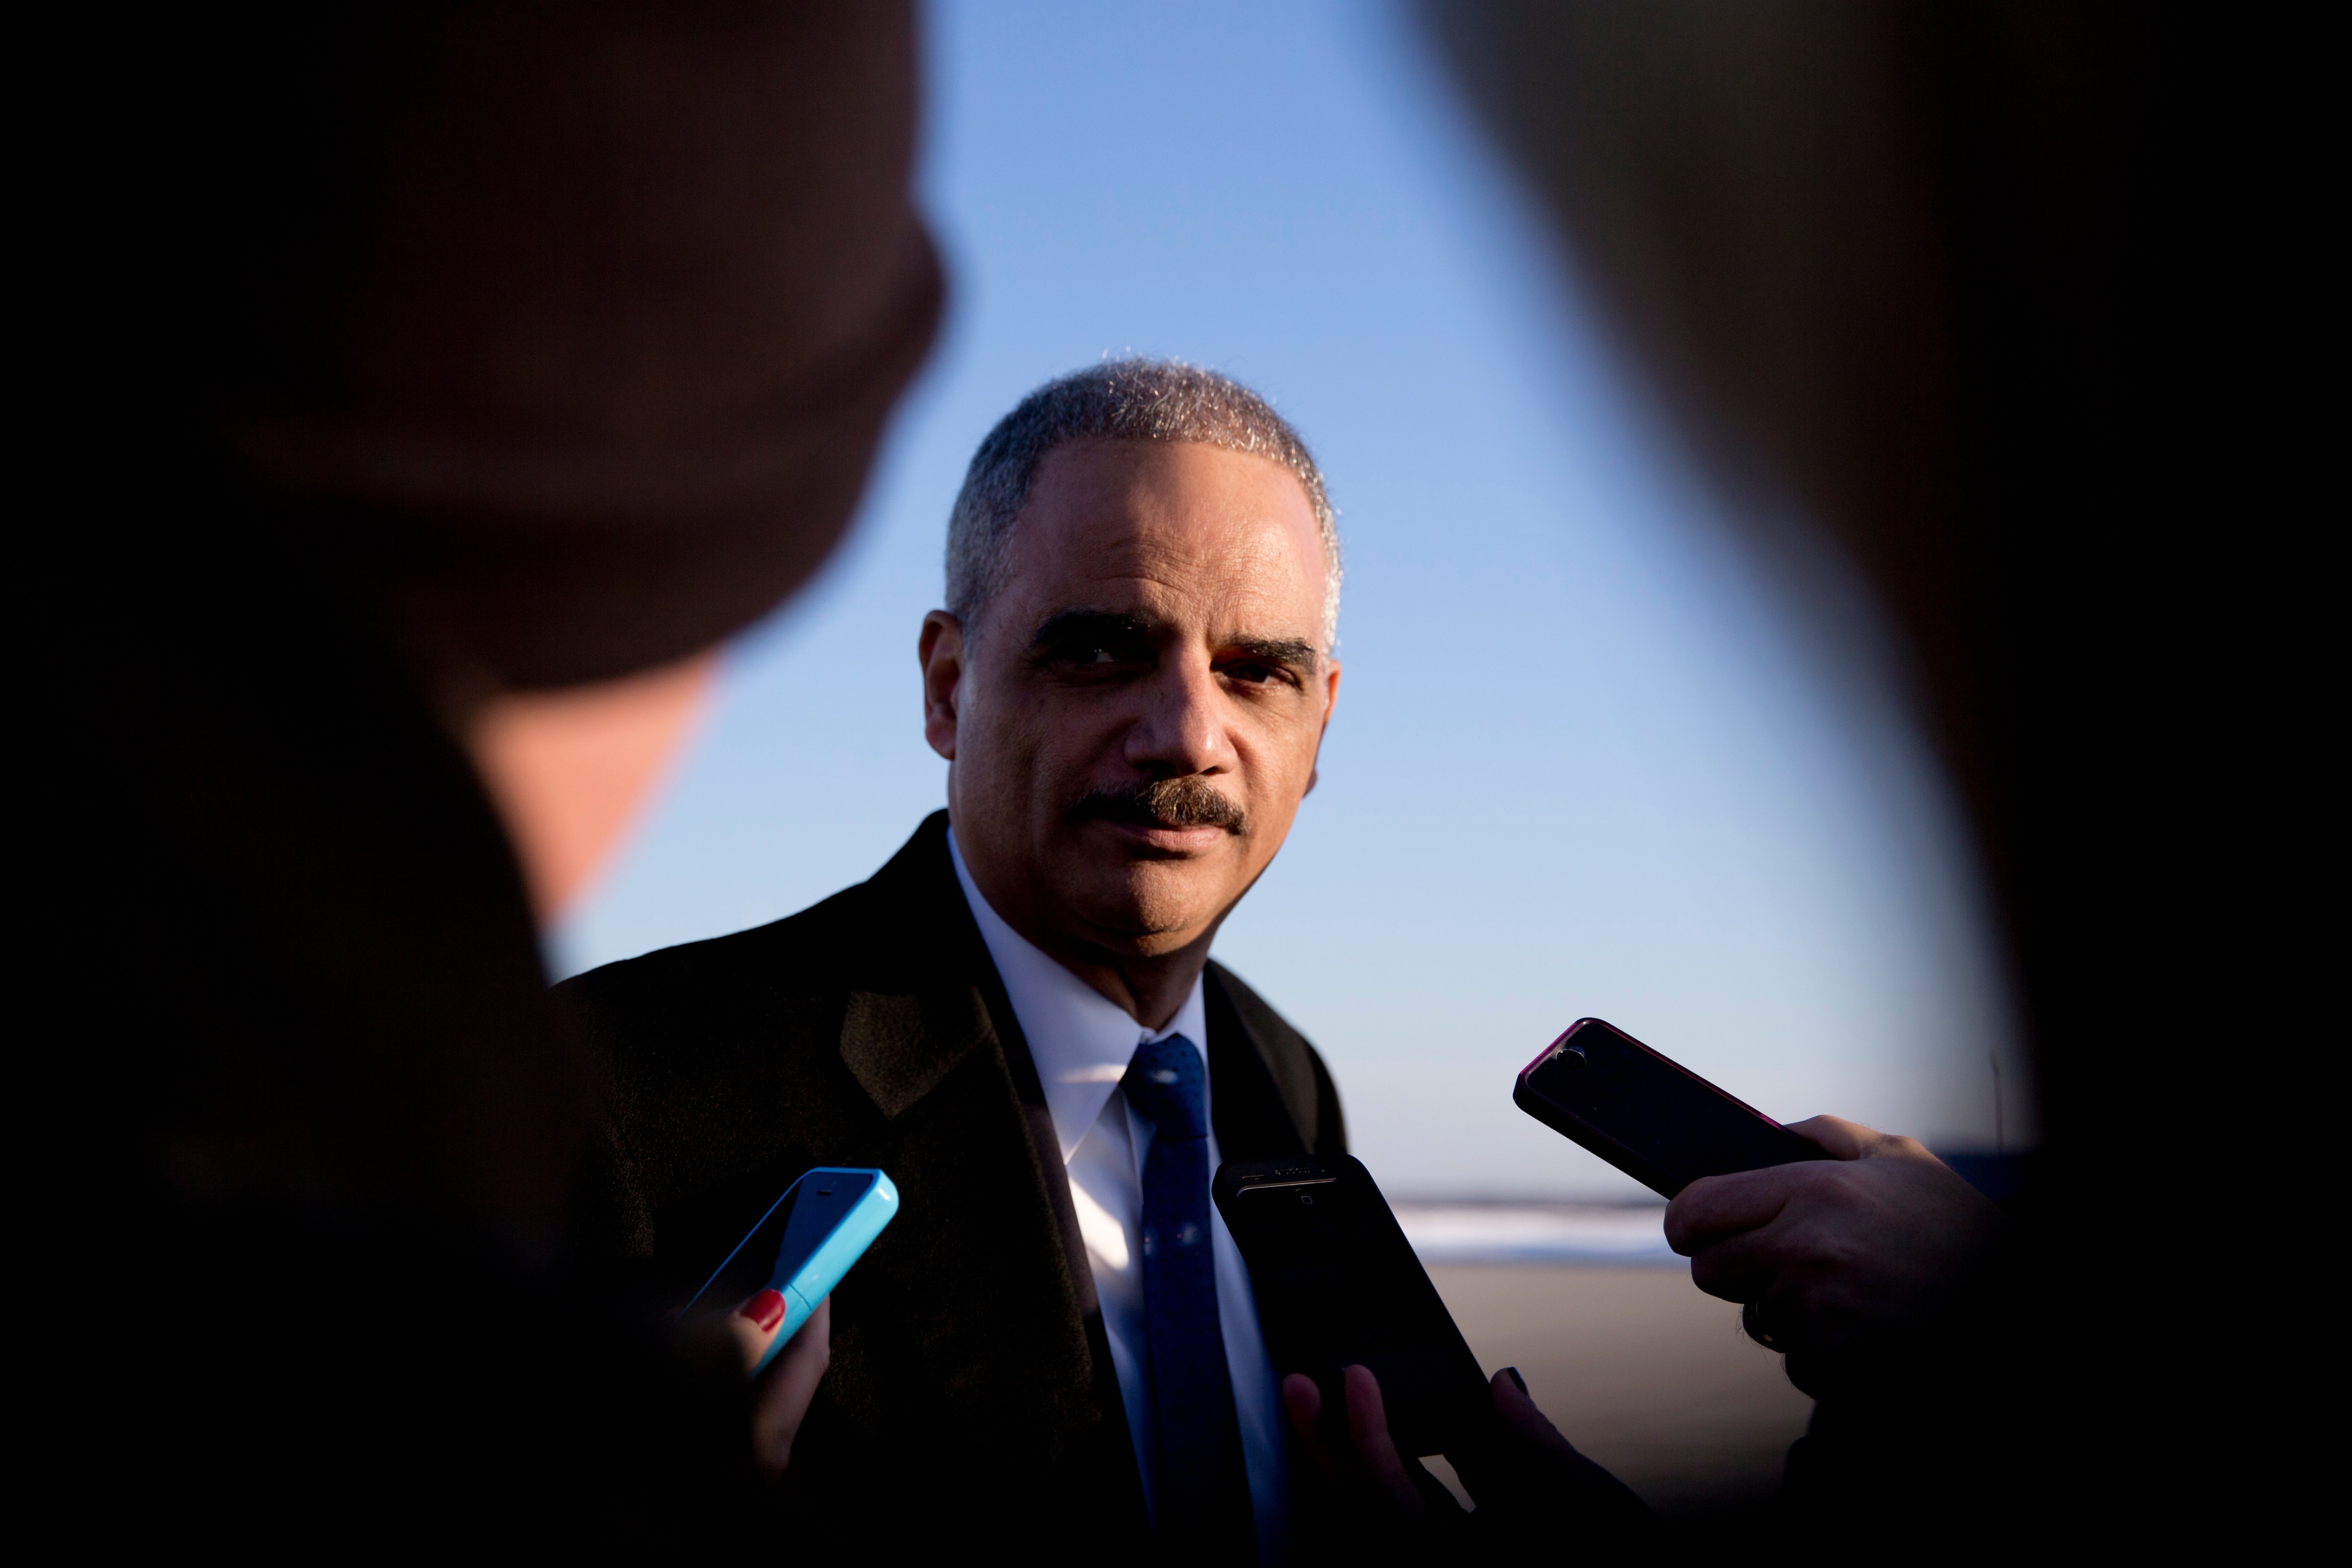 Attorney General Eric Holder talks with media as he arrives on Air Force One in Andrews Air Force Base, Md. on March 6, 2015, with President Barack Obama, from Columbia, S.C. (Carolyn Kaster—AP)